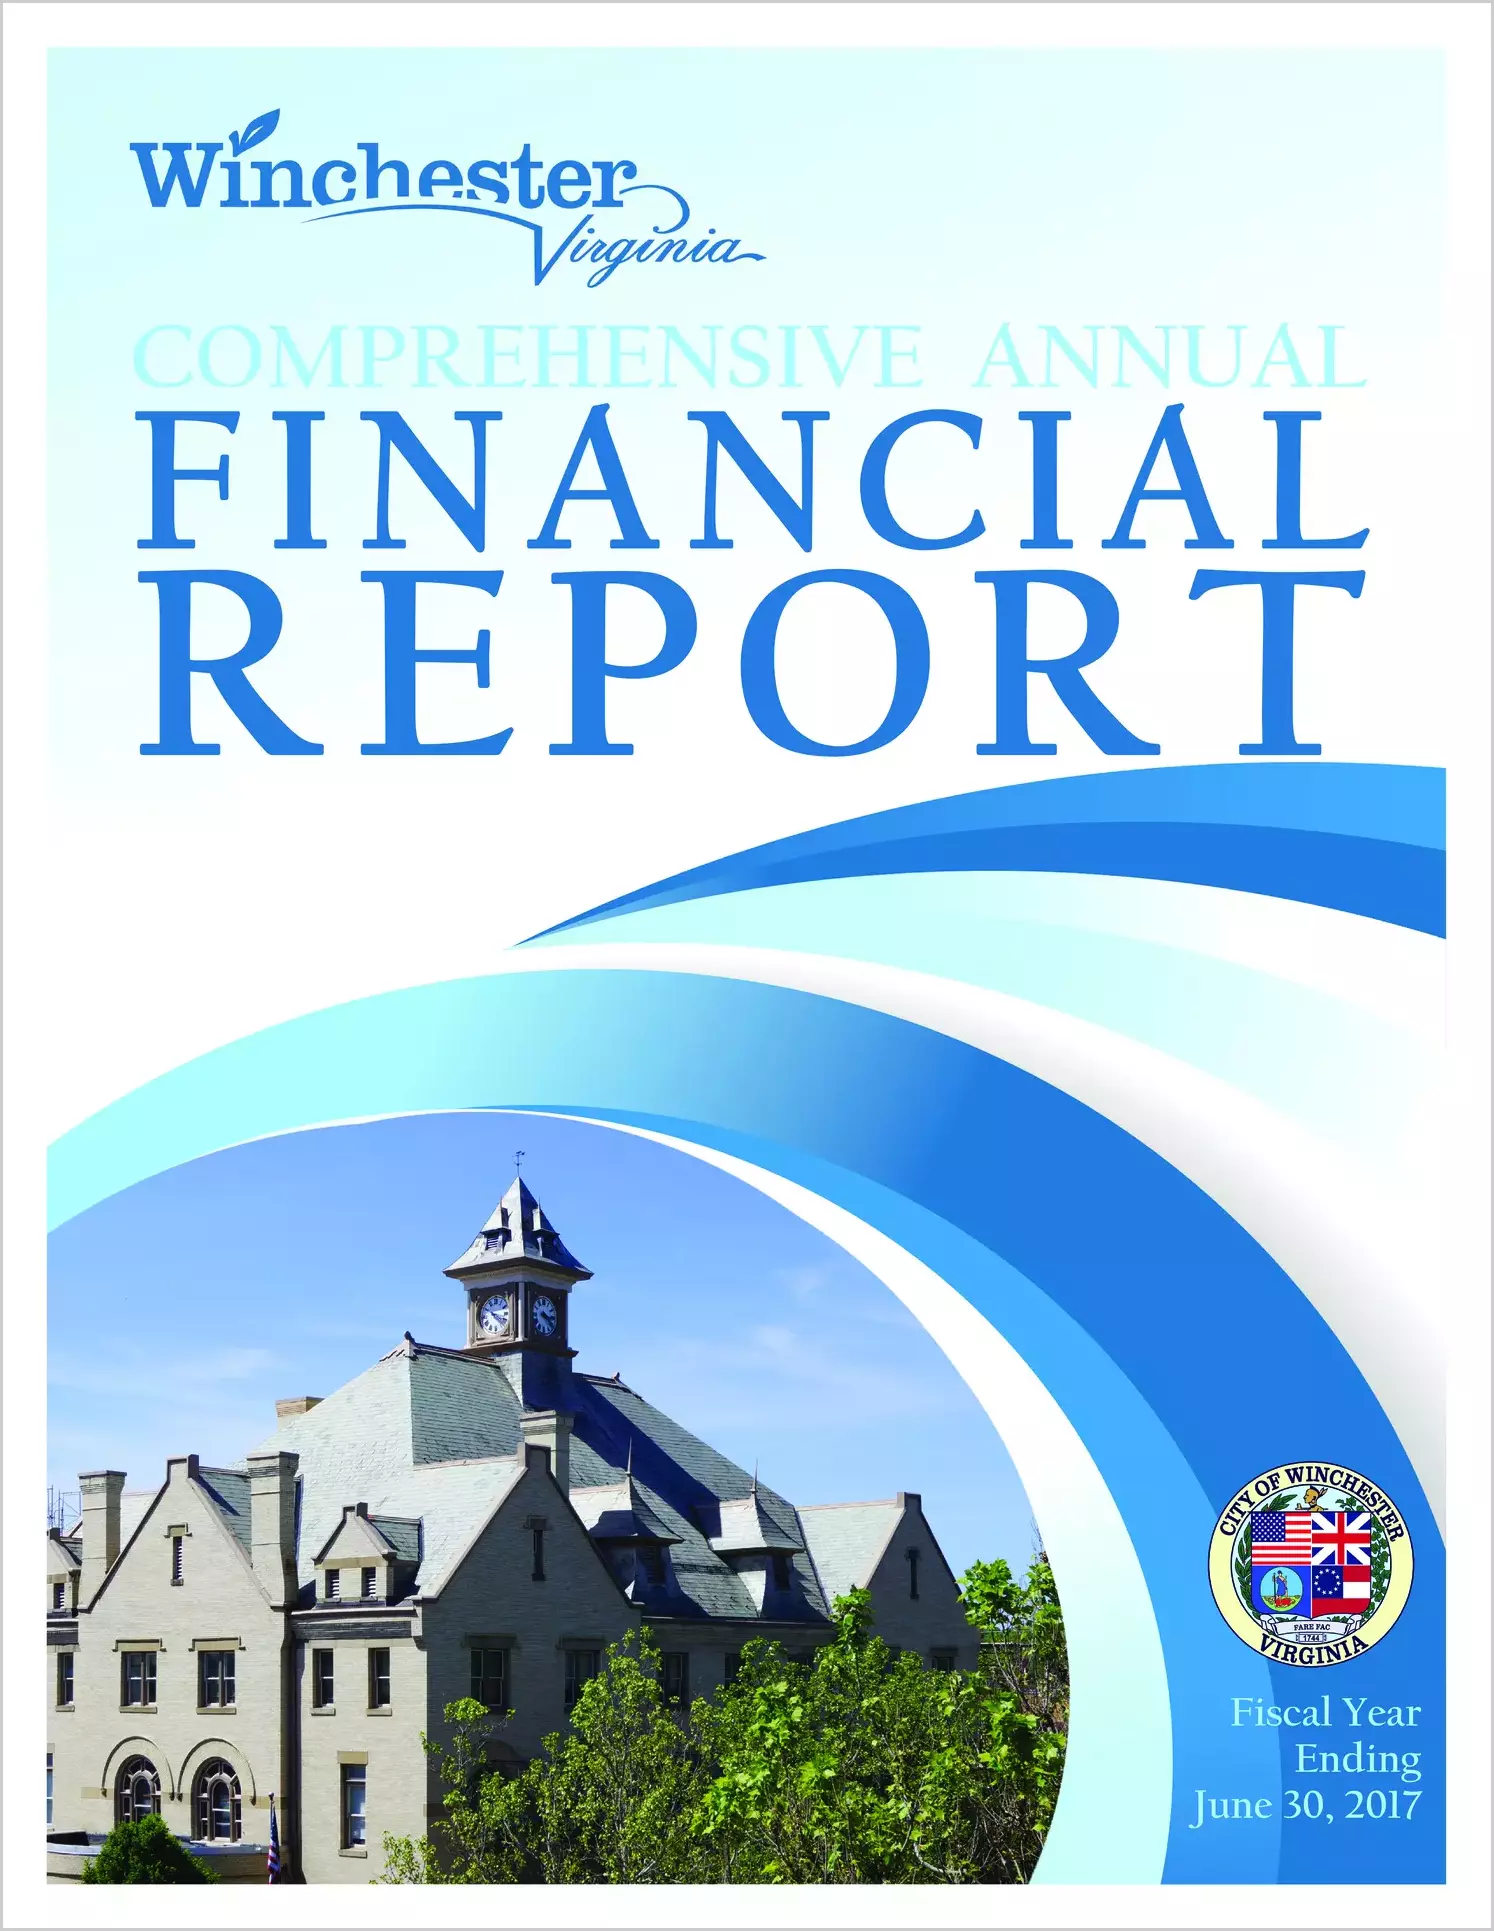 2017 Annual Financial Report for City of Winchester